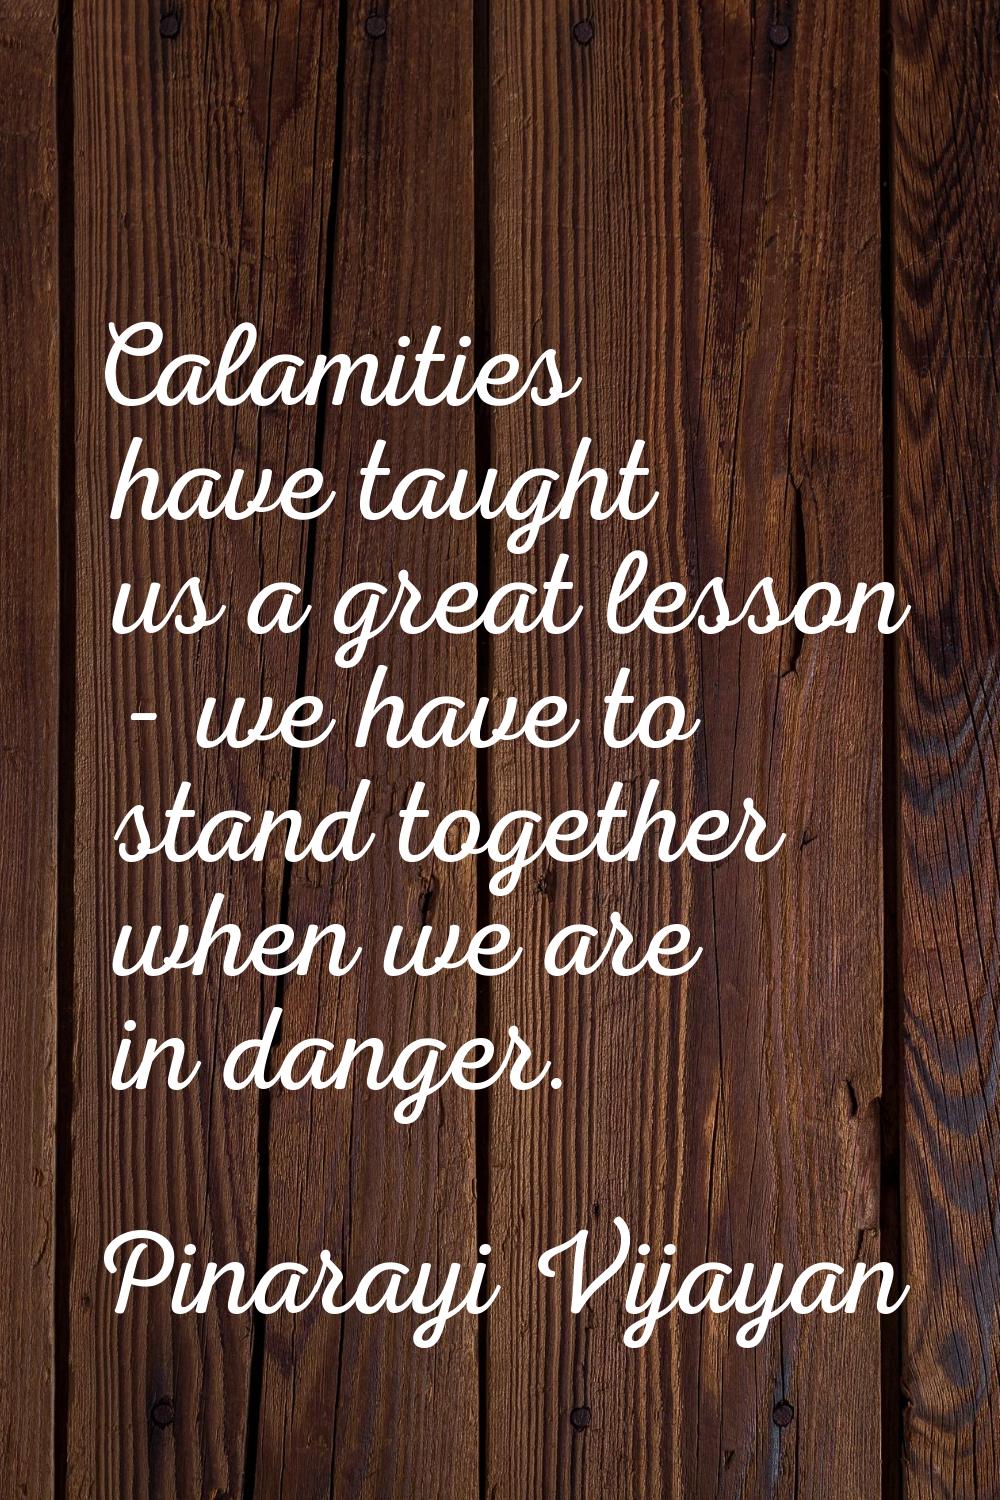 Calamities have taught us a great lesson - we have to stand together when we are in danger.